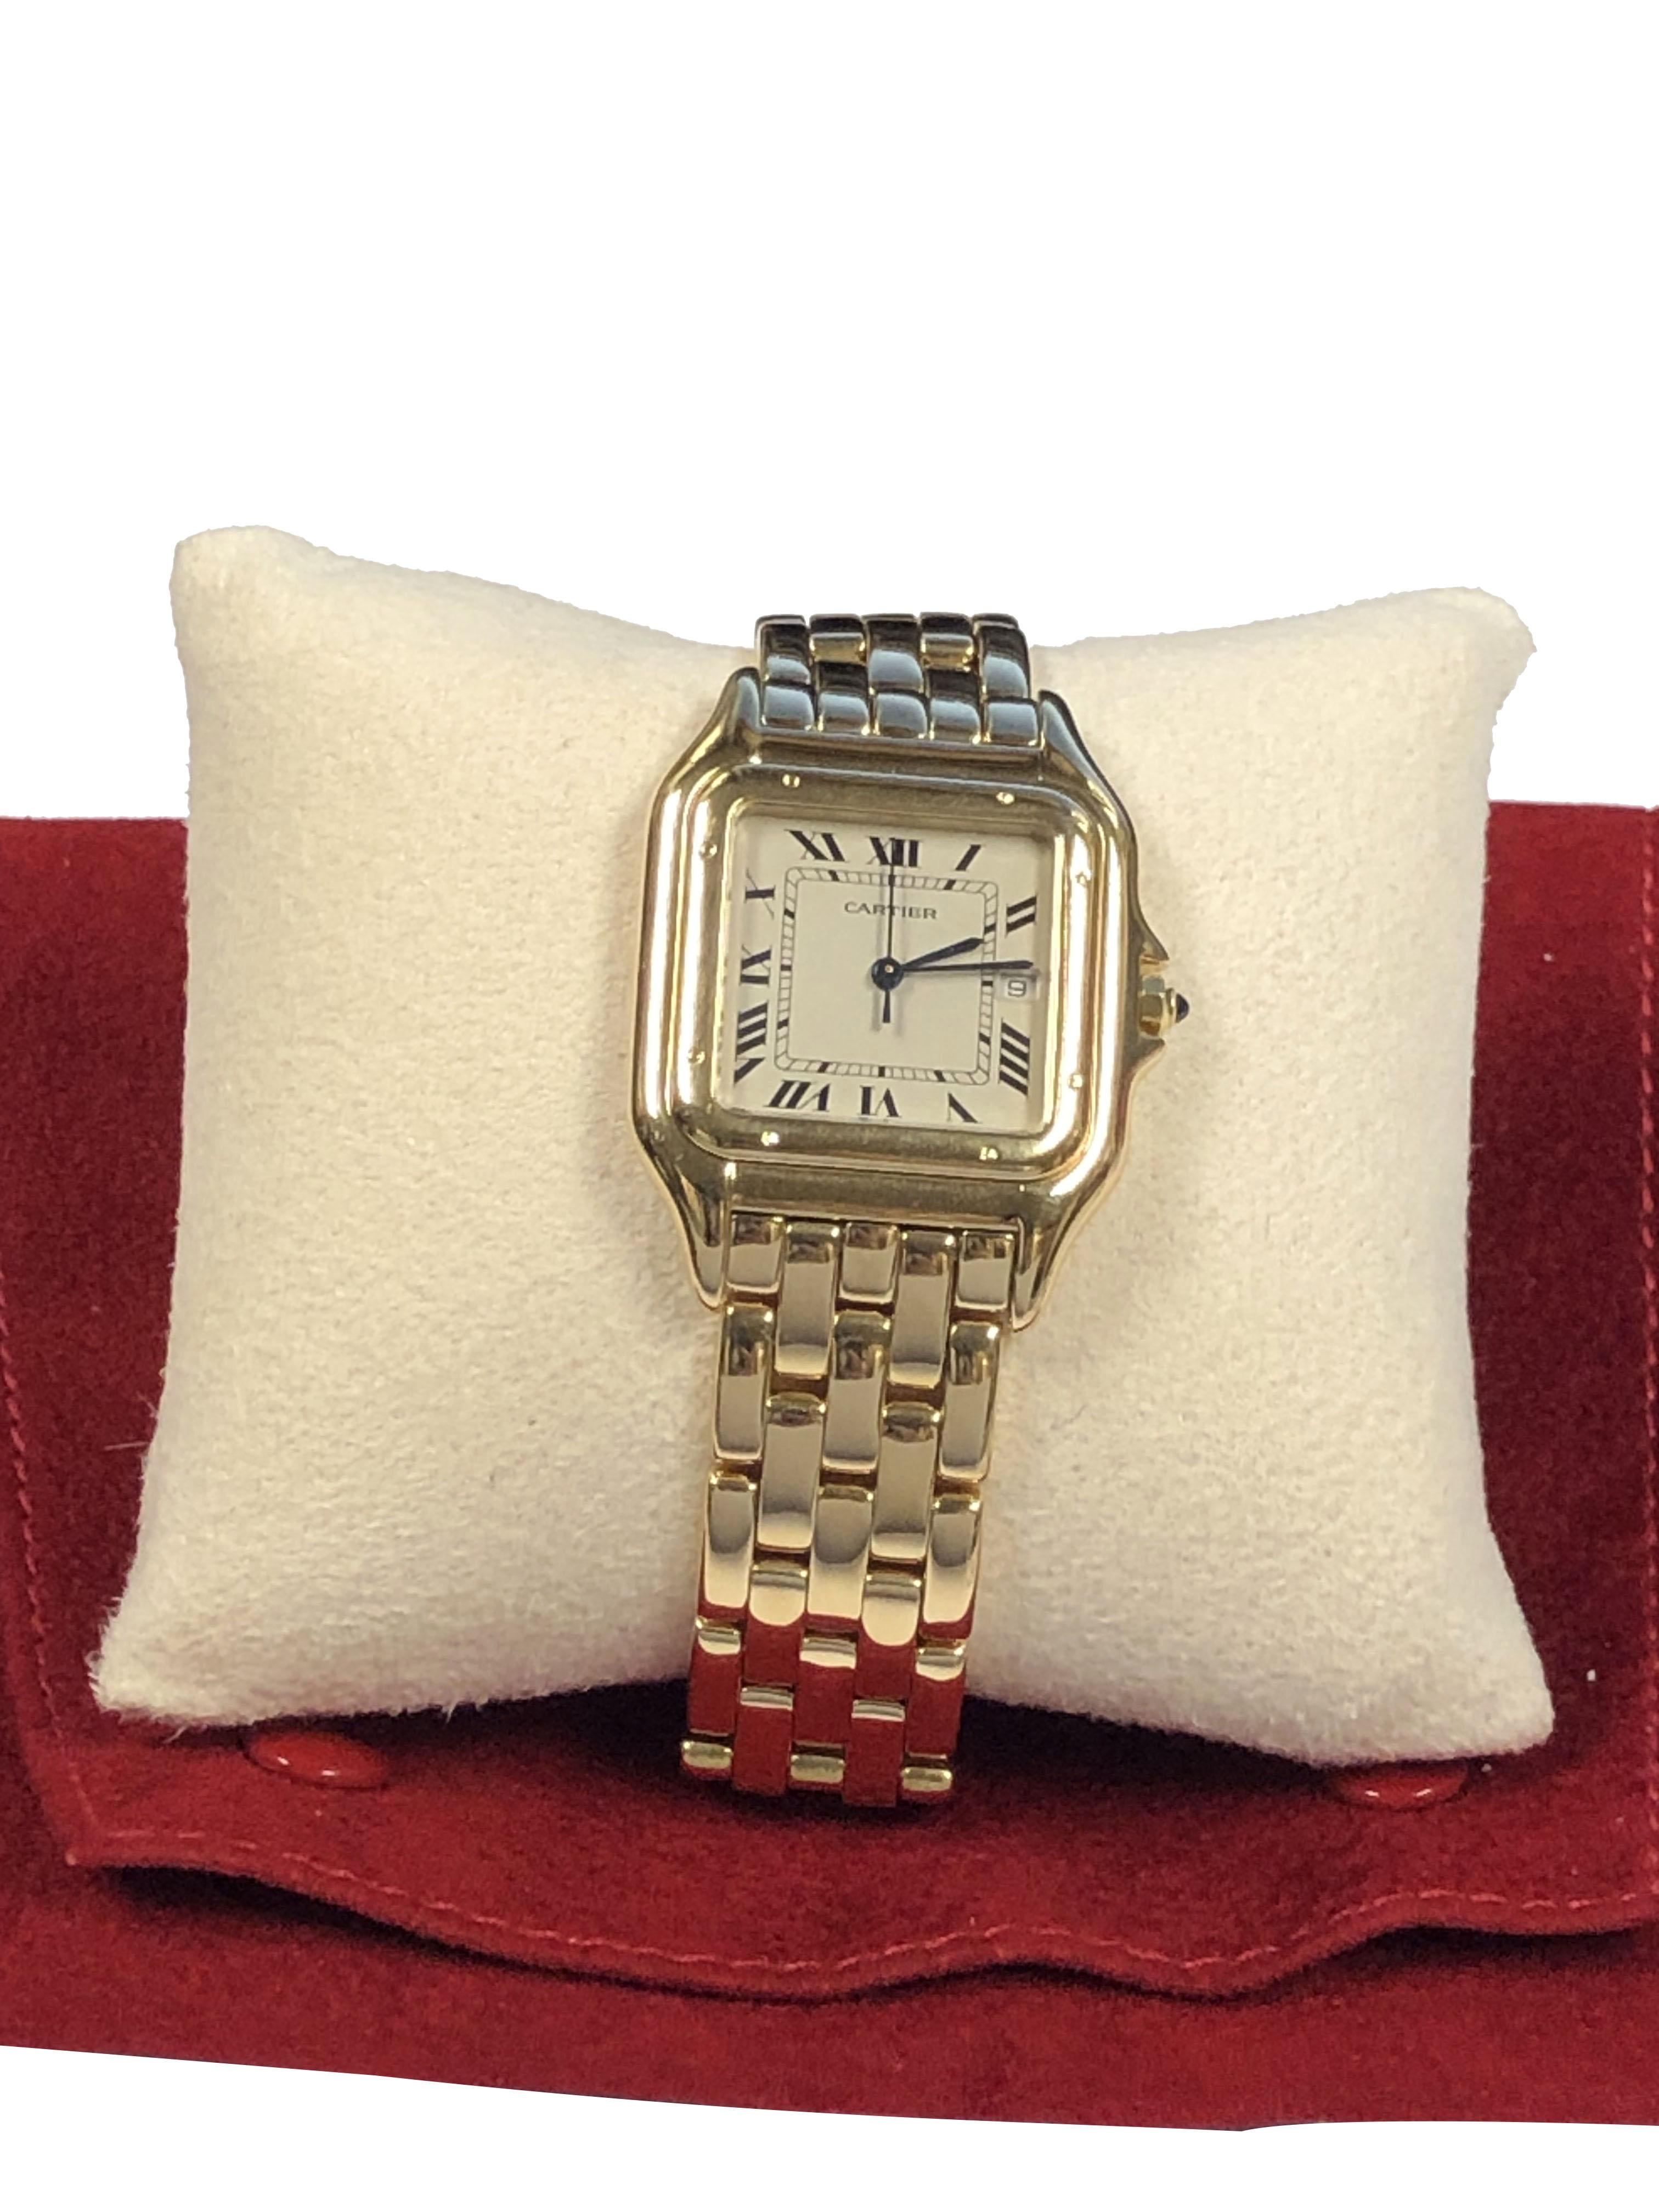 Cartier Panther Yellow Gold Jumbo Wrist Watch In Excellent Condition For Sale In Chicago, IL